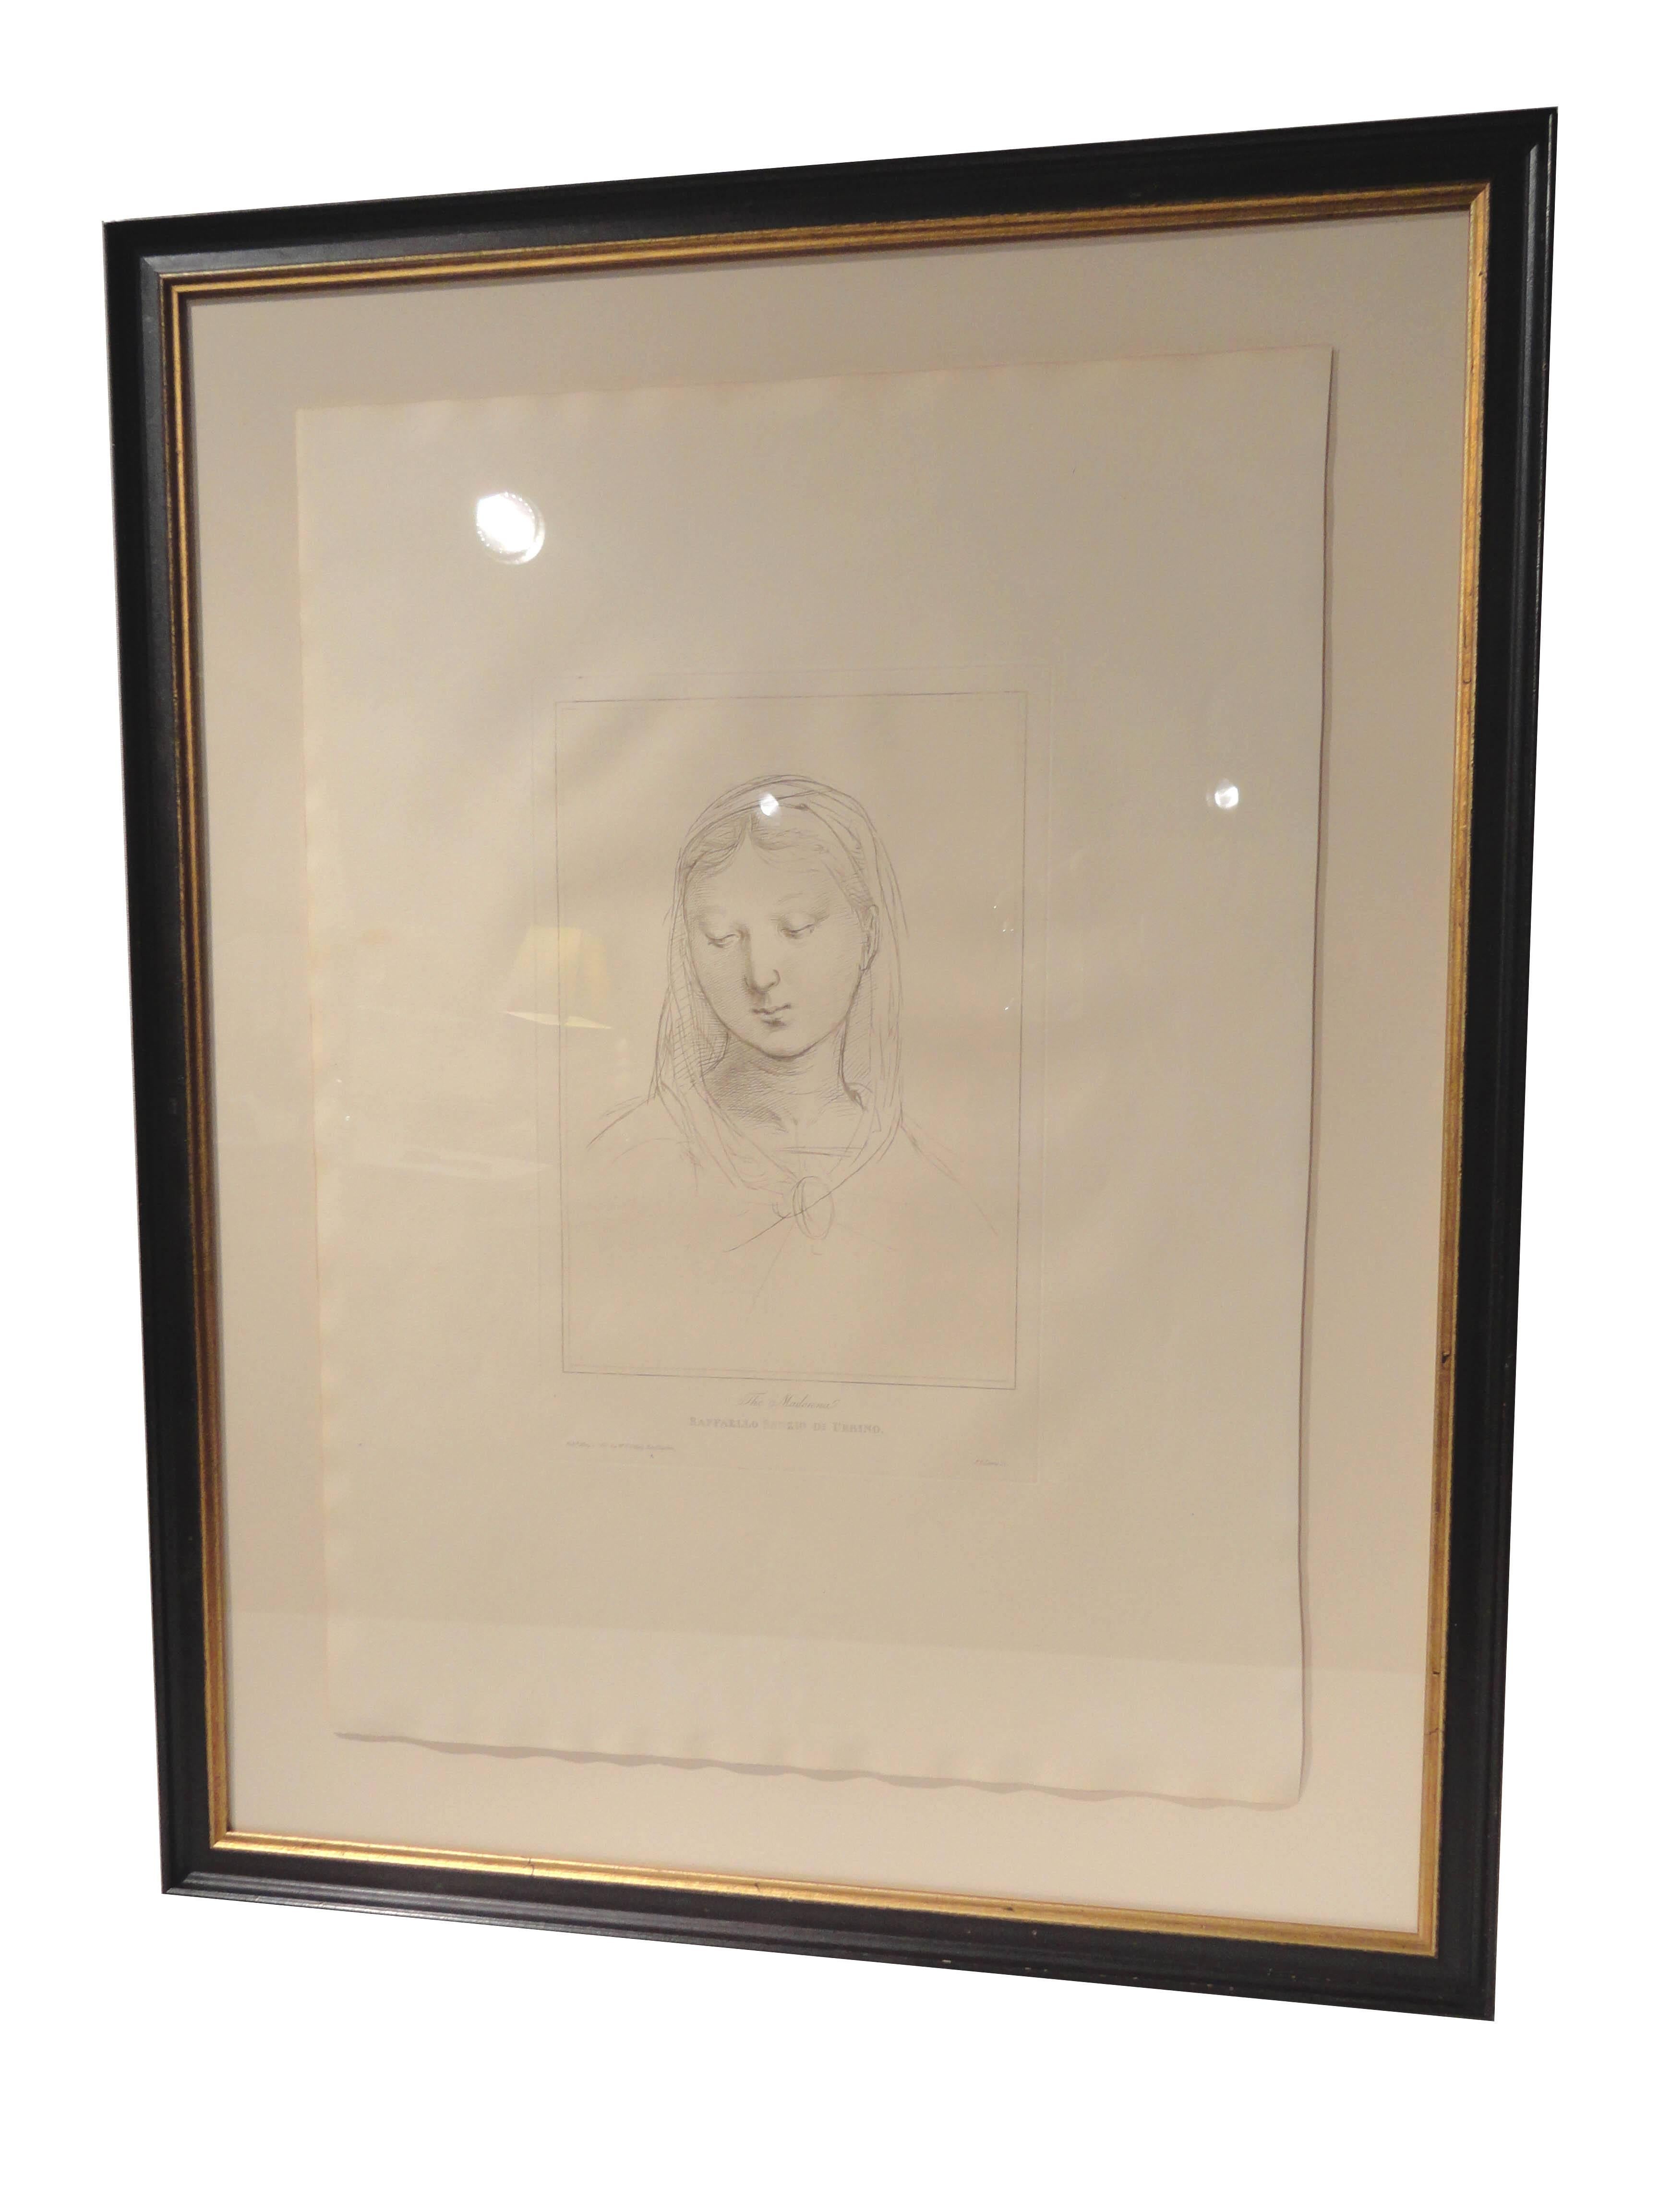 An exceptional collection of Italian engravings depicting various figures, faces and scenes of Rome. These pieces are custom framed in Classic black and gold frame.